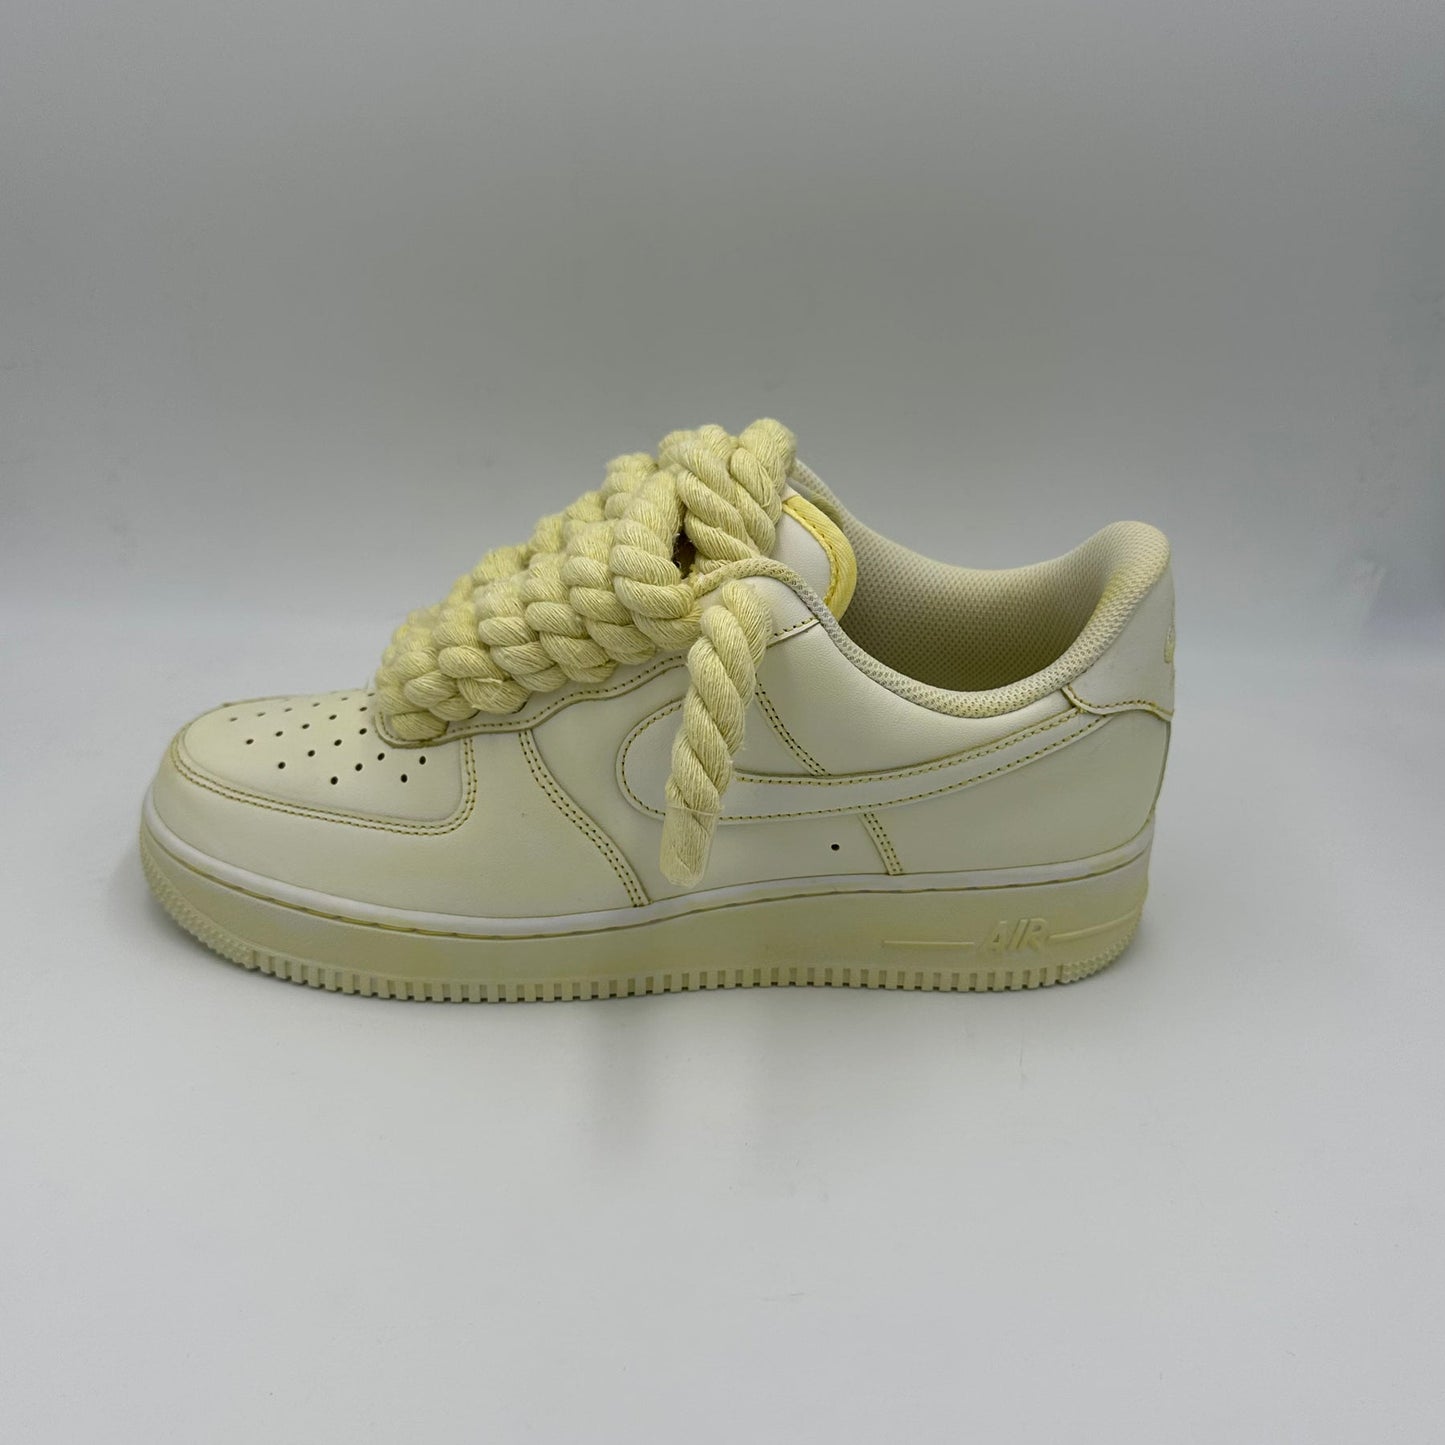 Nike Air Force 1 “Rope Laces” Total Golden Yellow - EV8 SoCal